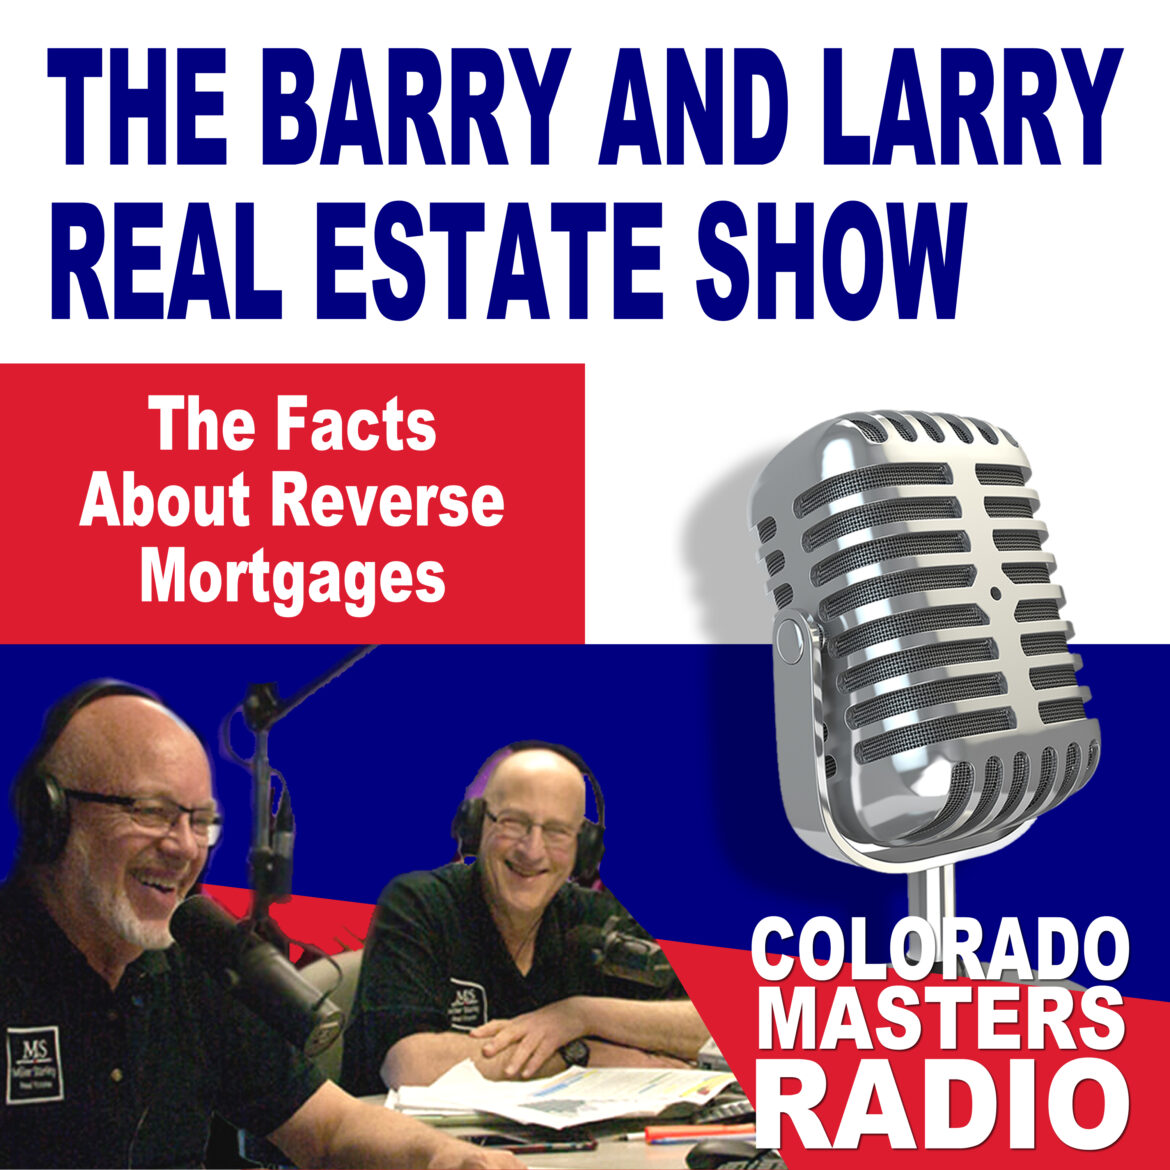 The Larry and Barry Real Estate Show - The Facts About Reverse Mortgages